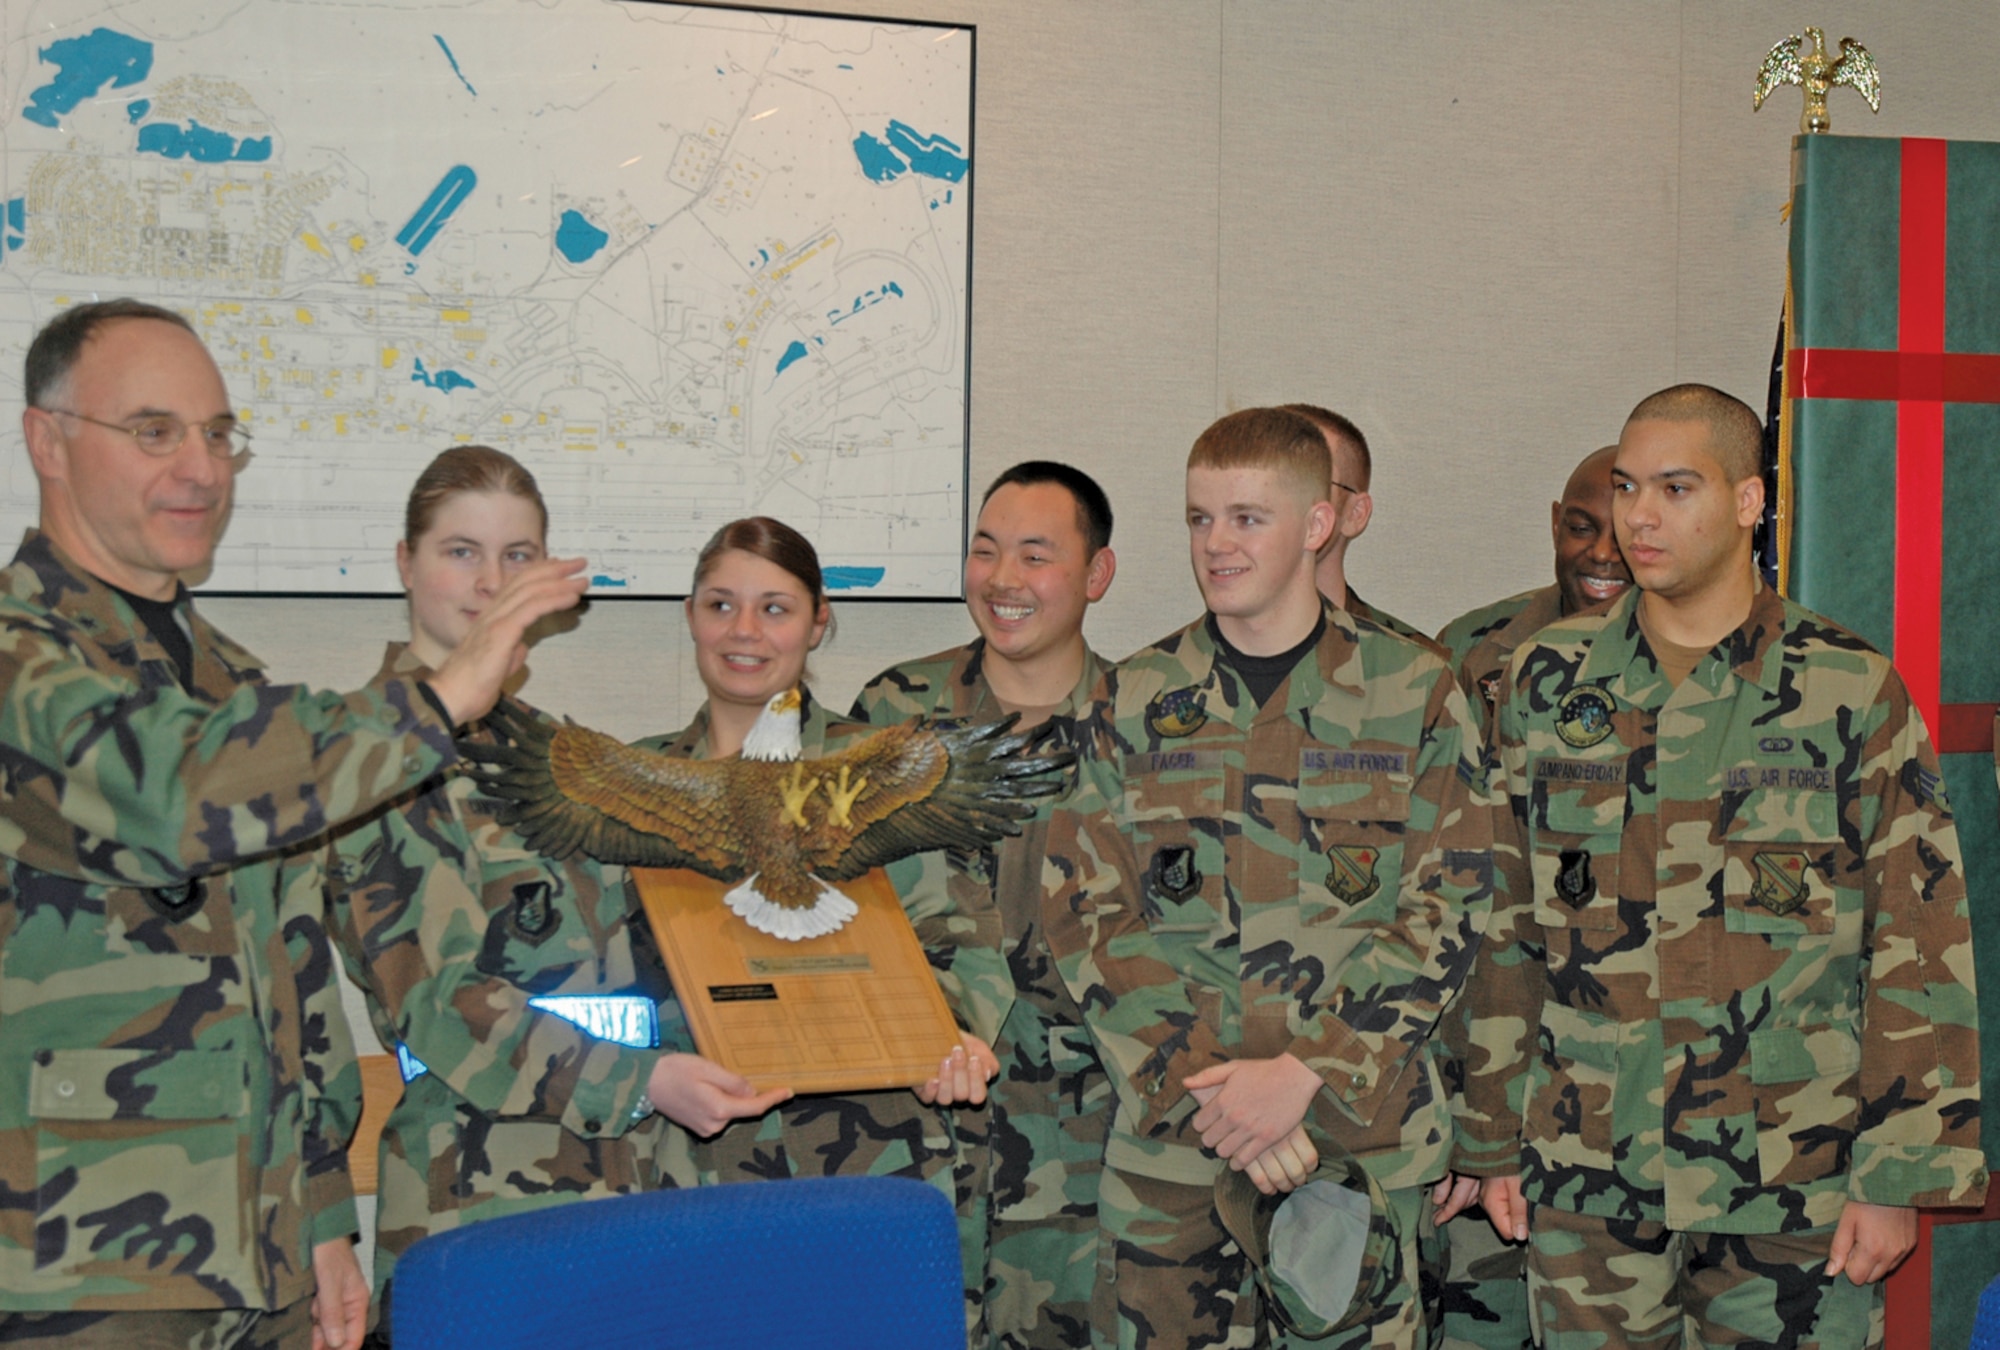 EIELSON AIR FORCE BASE, Alaska--The 4th Quarter Dorm Excellence Competition winners receive the winning plaque from Brig. Gen. Dave Scott, 354th Fighter Wing commander, at the Jan. 4 wing staff meeting. The winning dormitory was building 2353, housing single Airmen from the 354th Medical Group, 354th Operations Squadron, 354th Services Squadron, 354th Comptroller Squadron and Detachment 460.